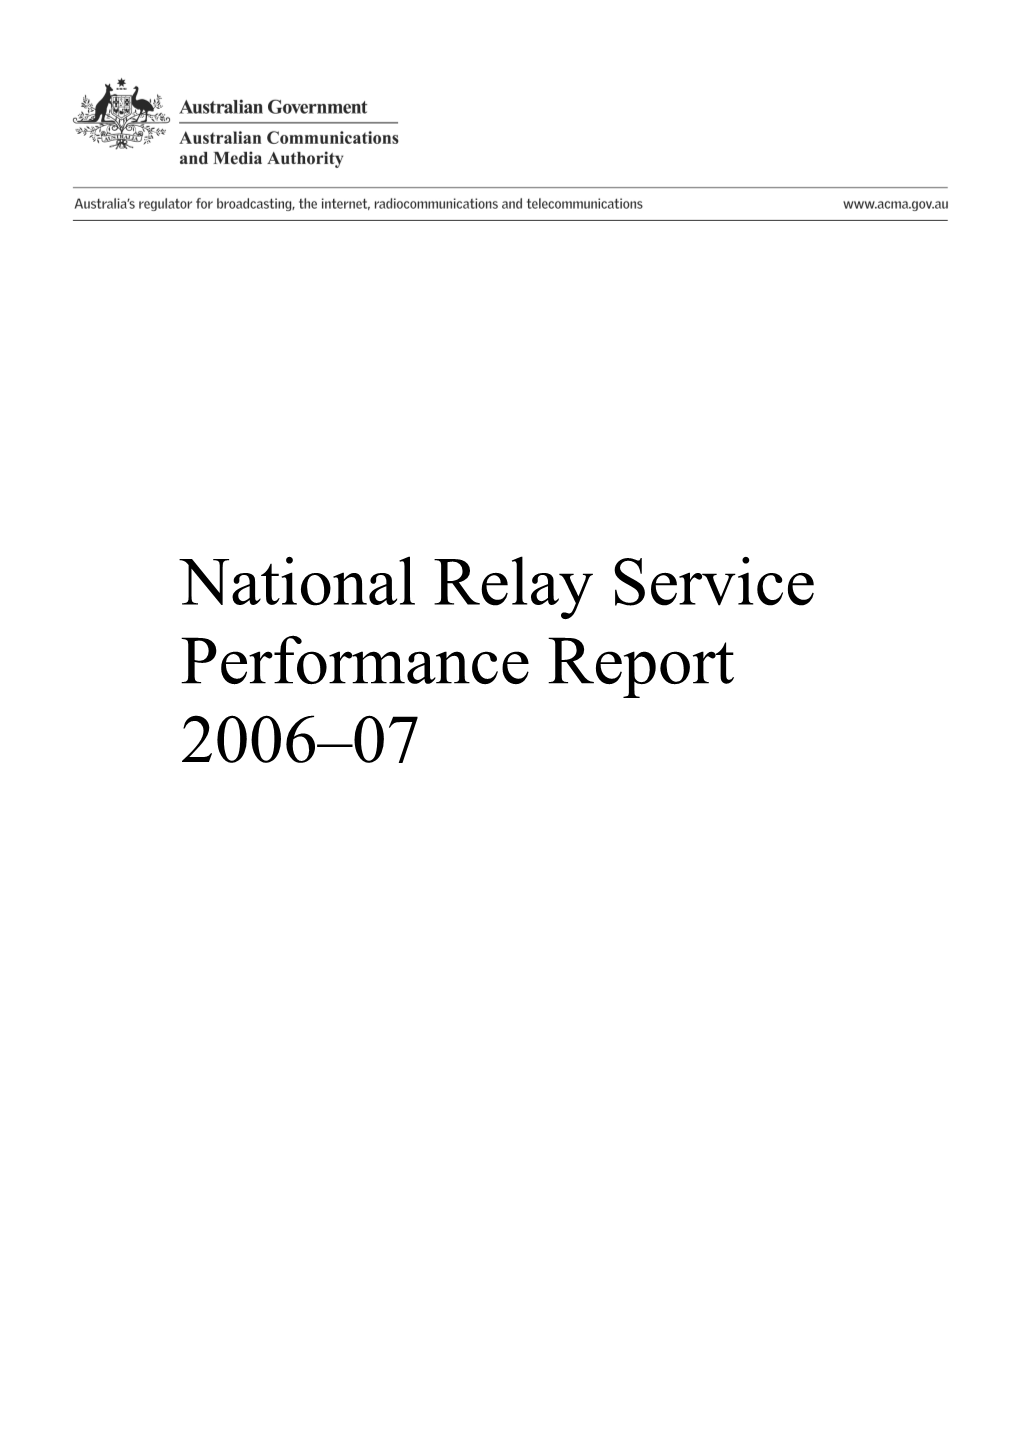 National Relay Service Performance Report 2006-07